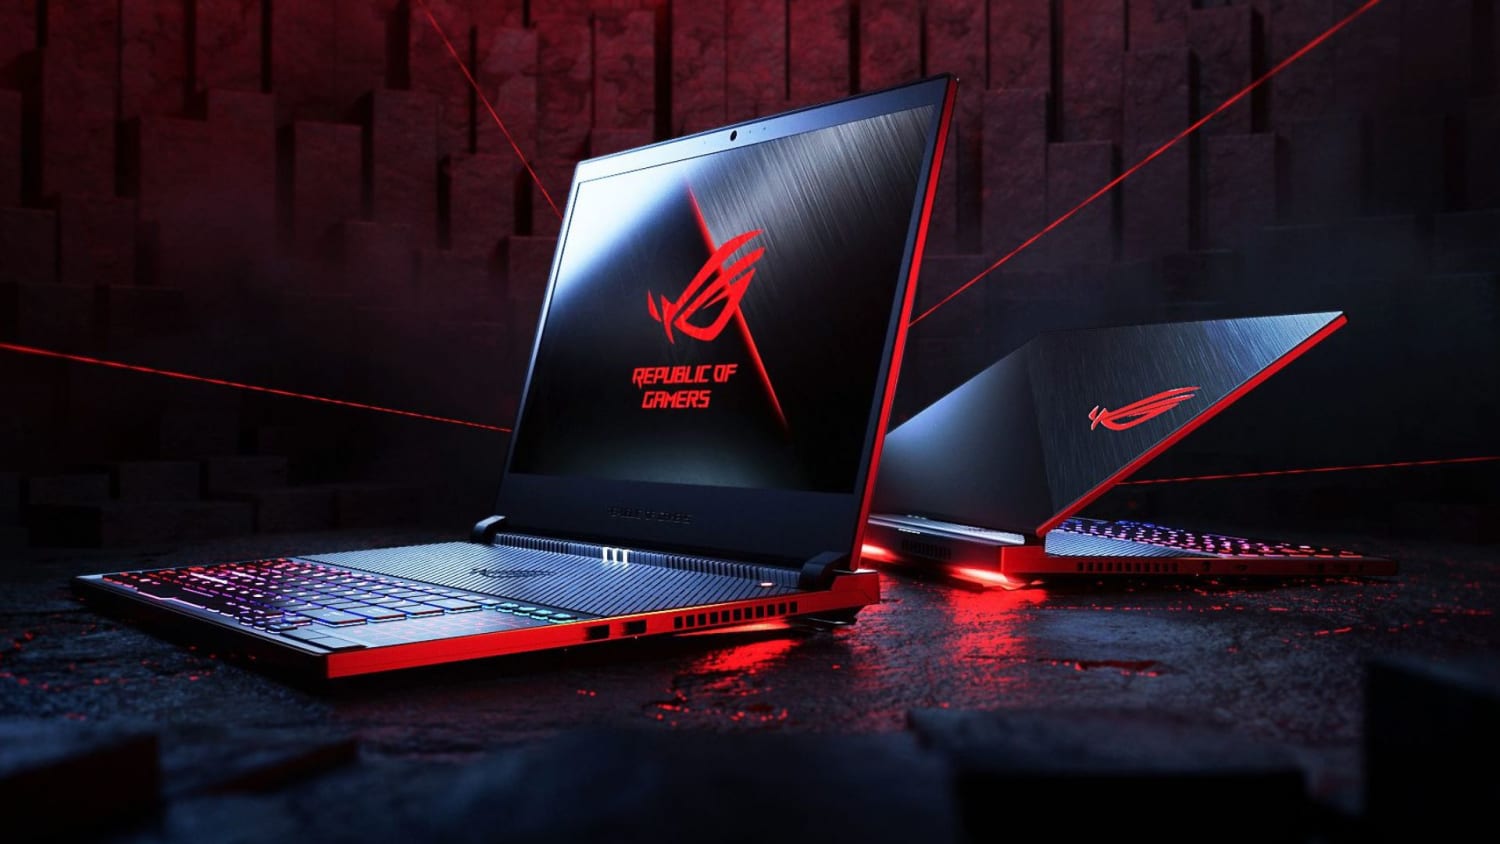 Best Gaming Laptop Under 800 Dollars In 2020 You Should Not Miss